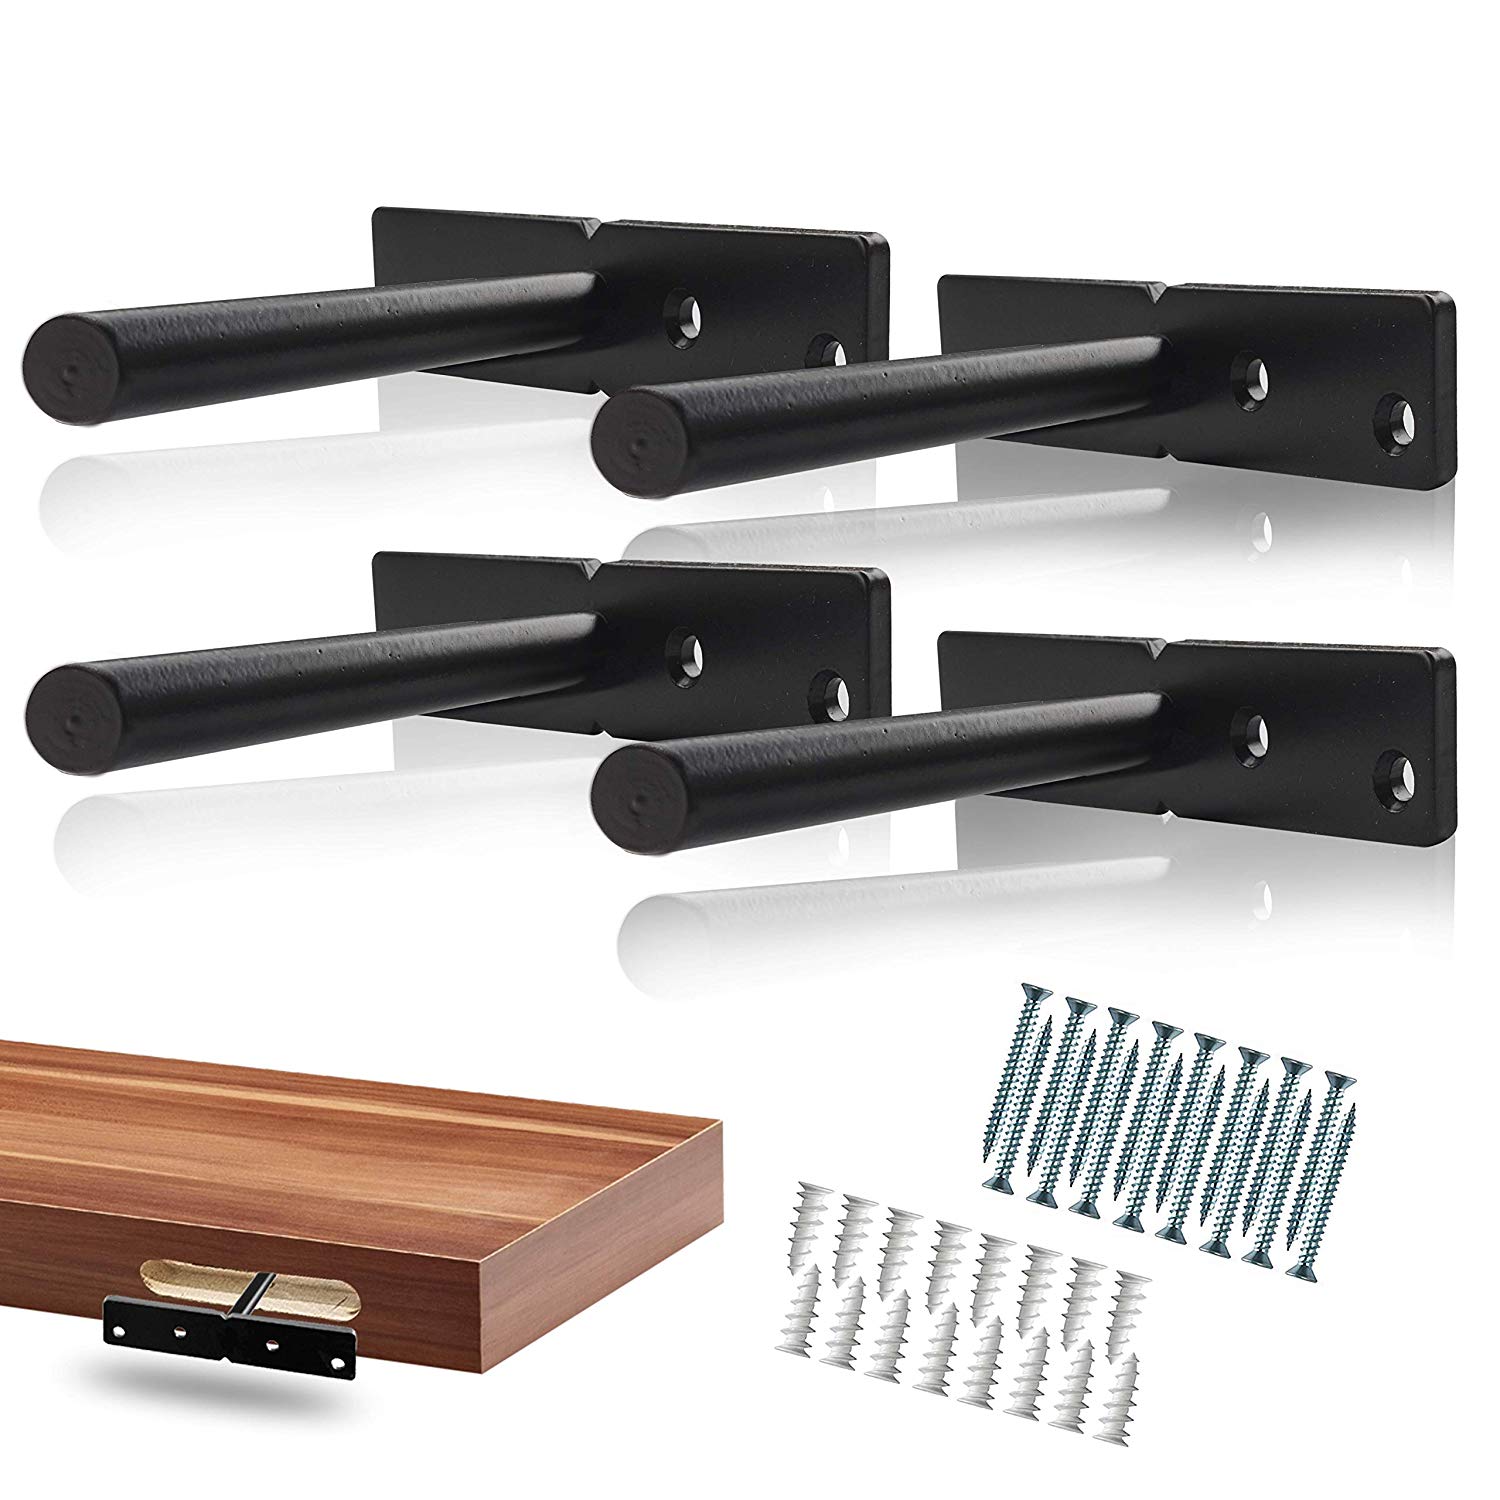 floating shelf bracket black heavy duty inch pack fixings invisible blind hidden steel supports for wood screws wall plugs included best space saving industrial pipe shelving kit